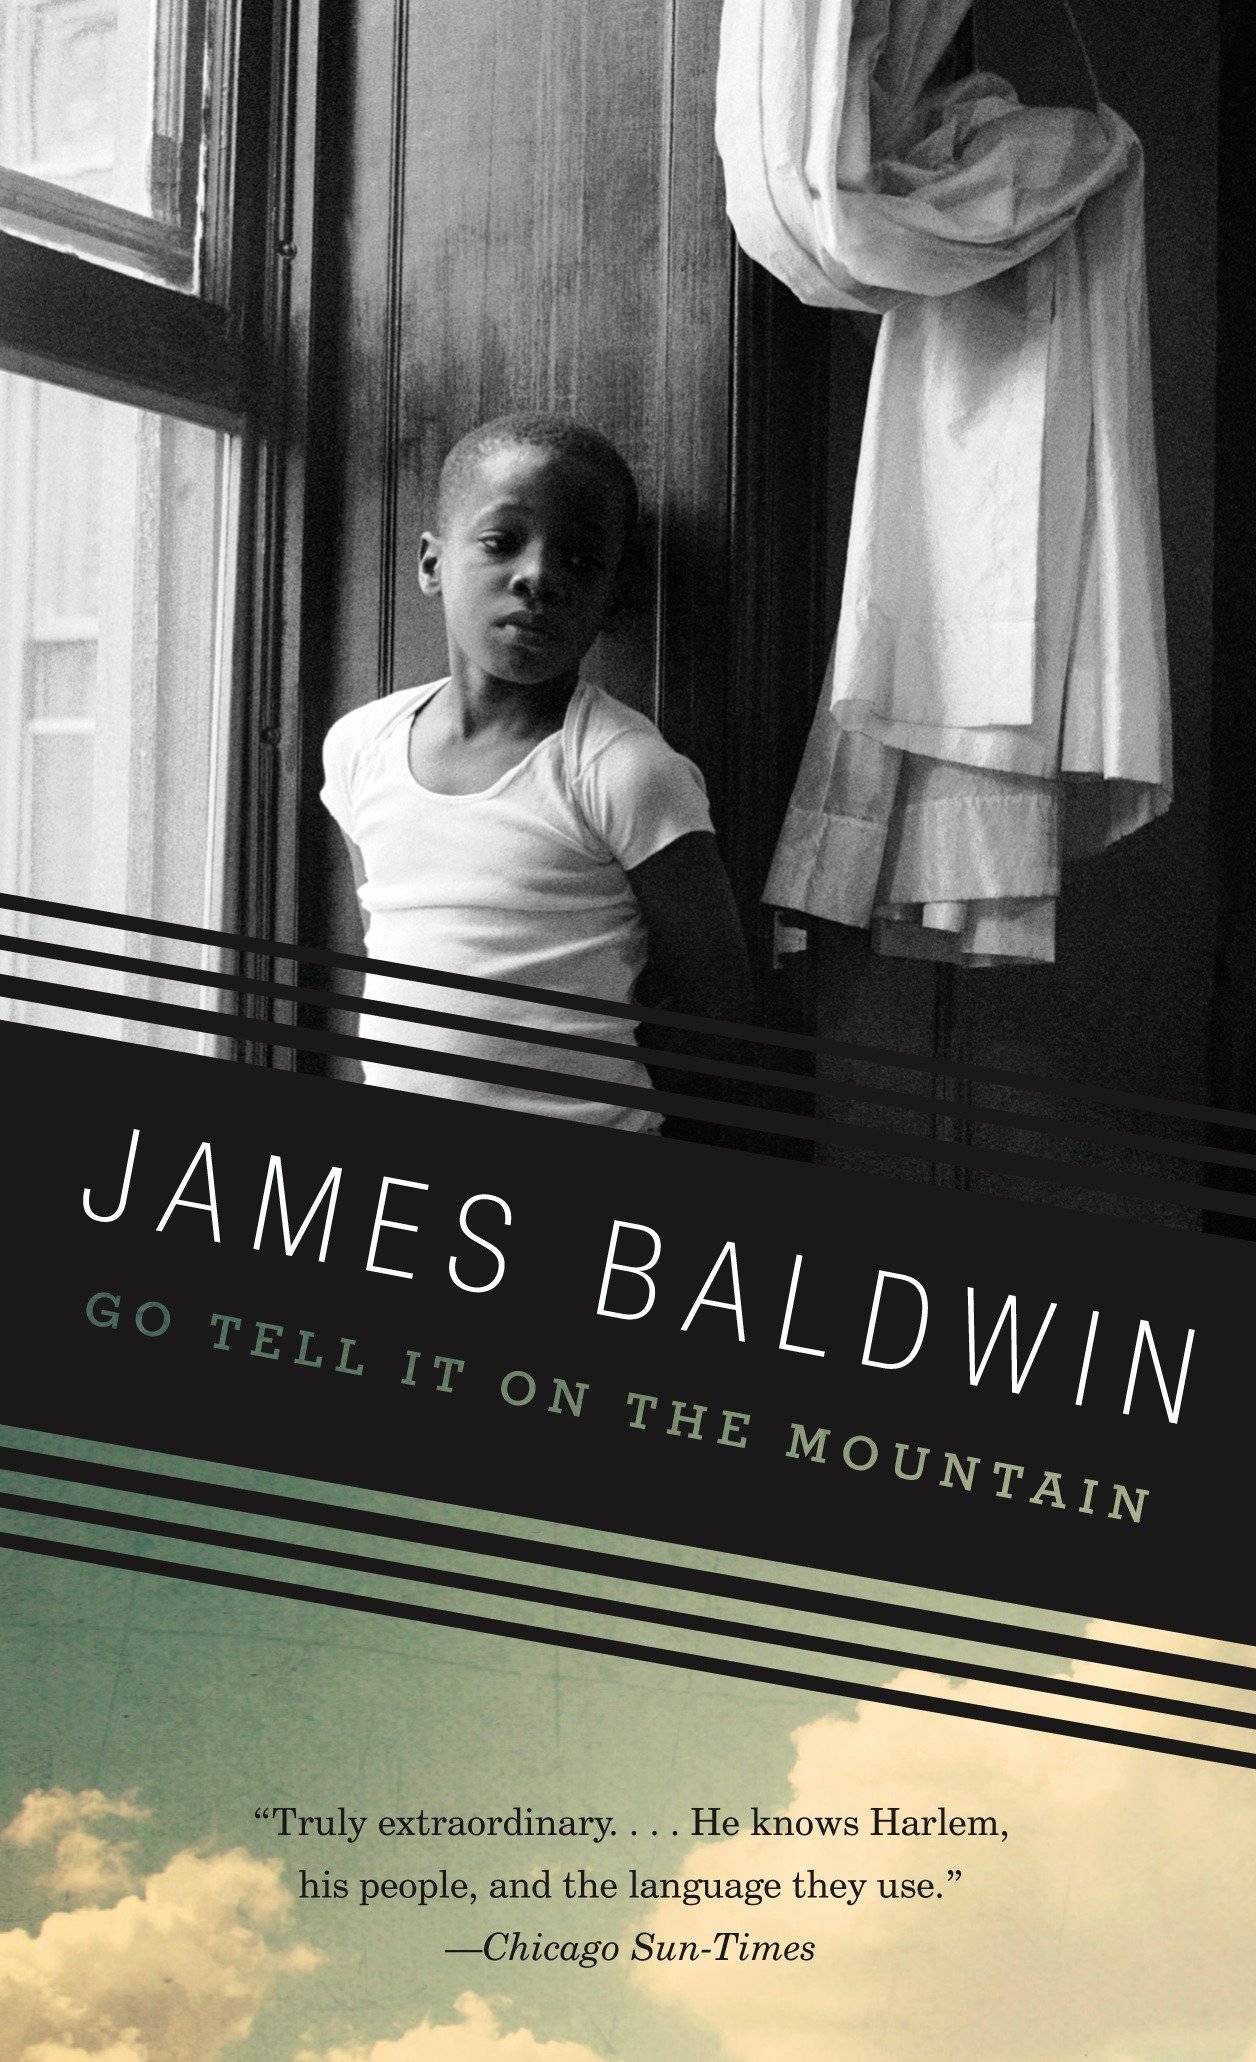 Book cover featuring a black and white photo of a black boy sitting in a window sill